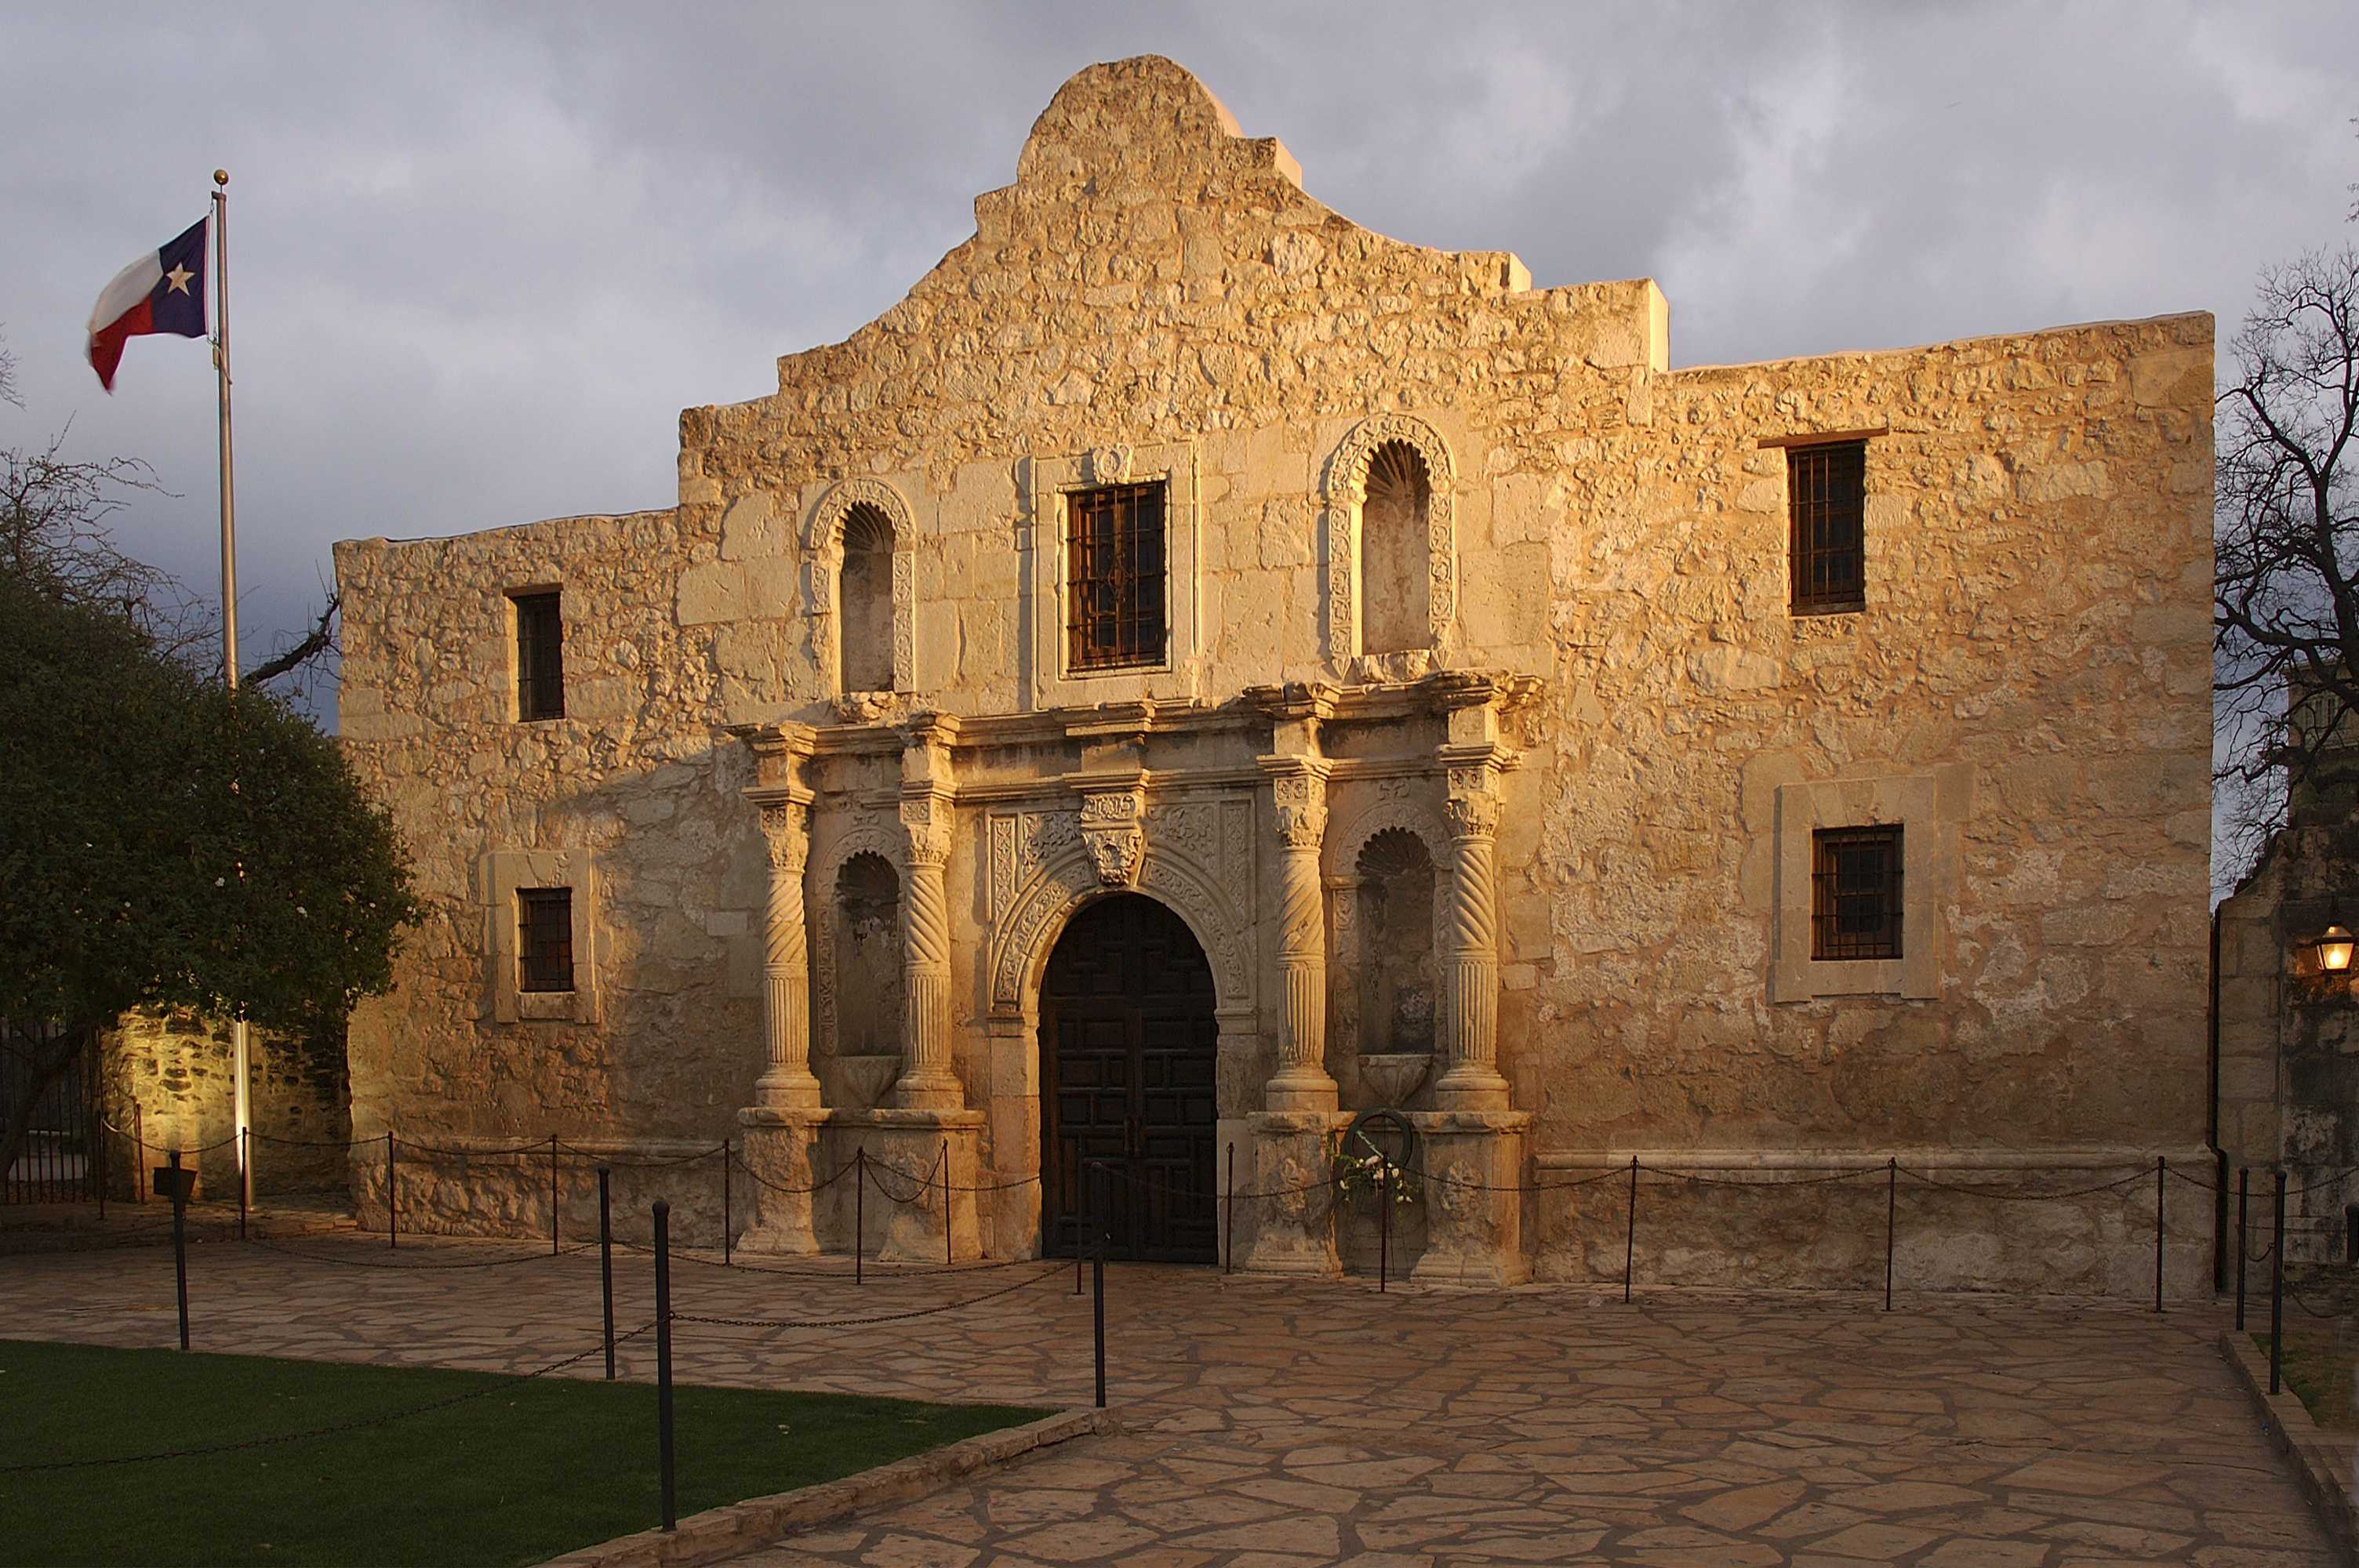 what to do in san antonio